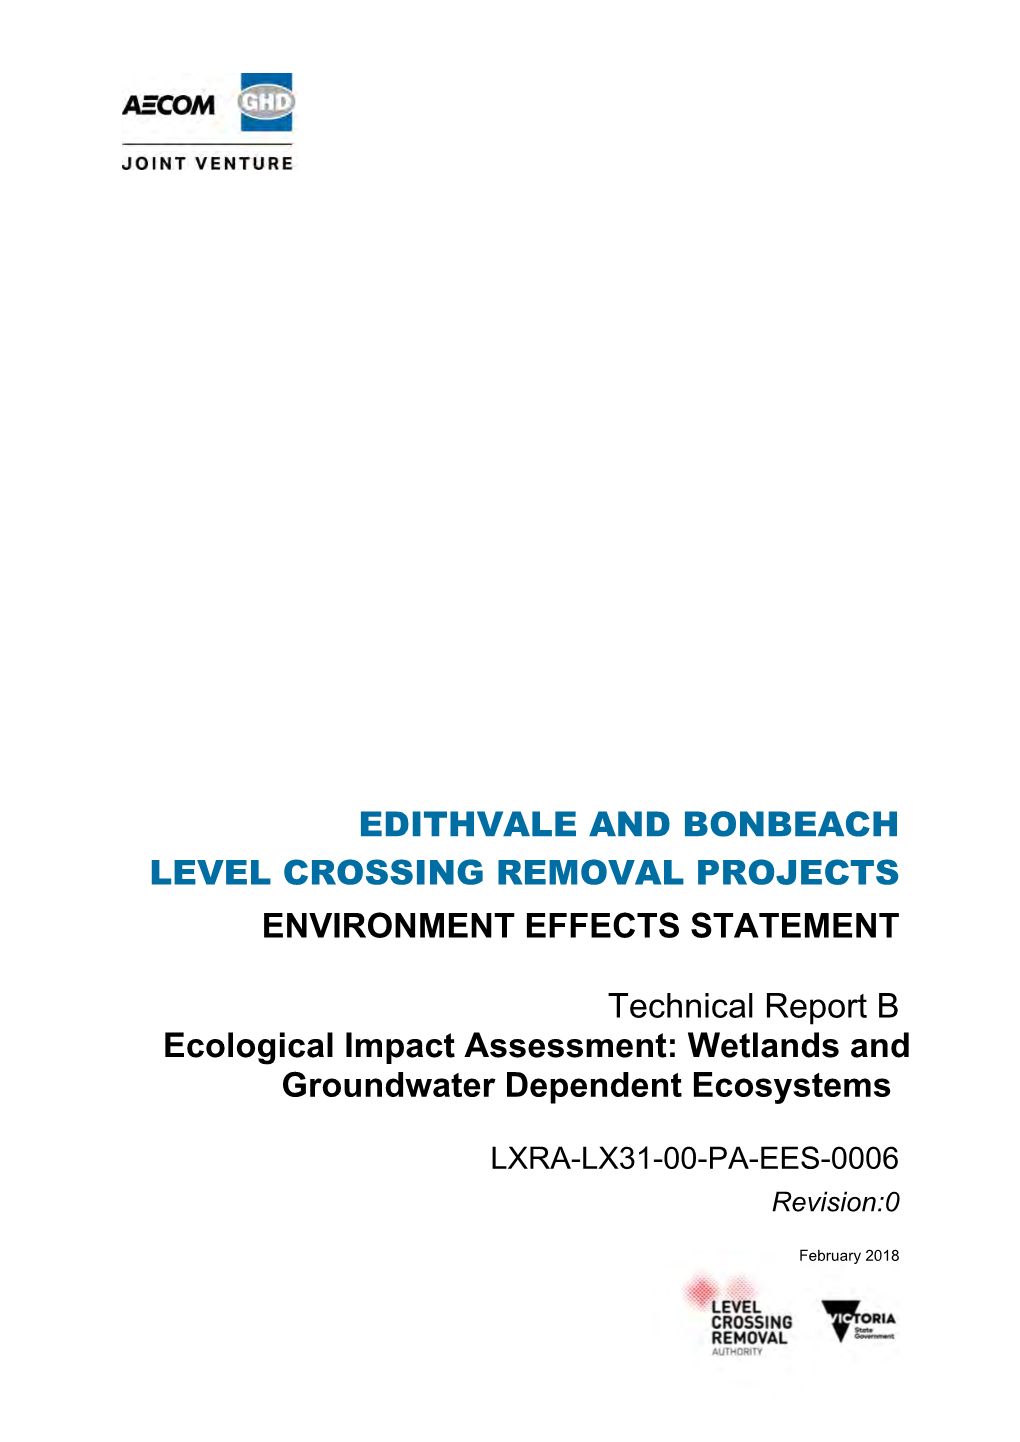 Technical Report B – Ecology: Wetlands and Groundwater